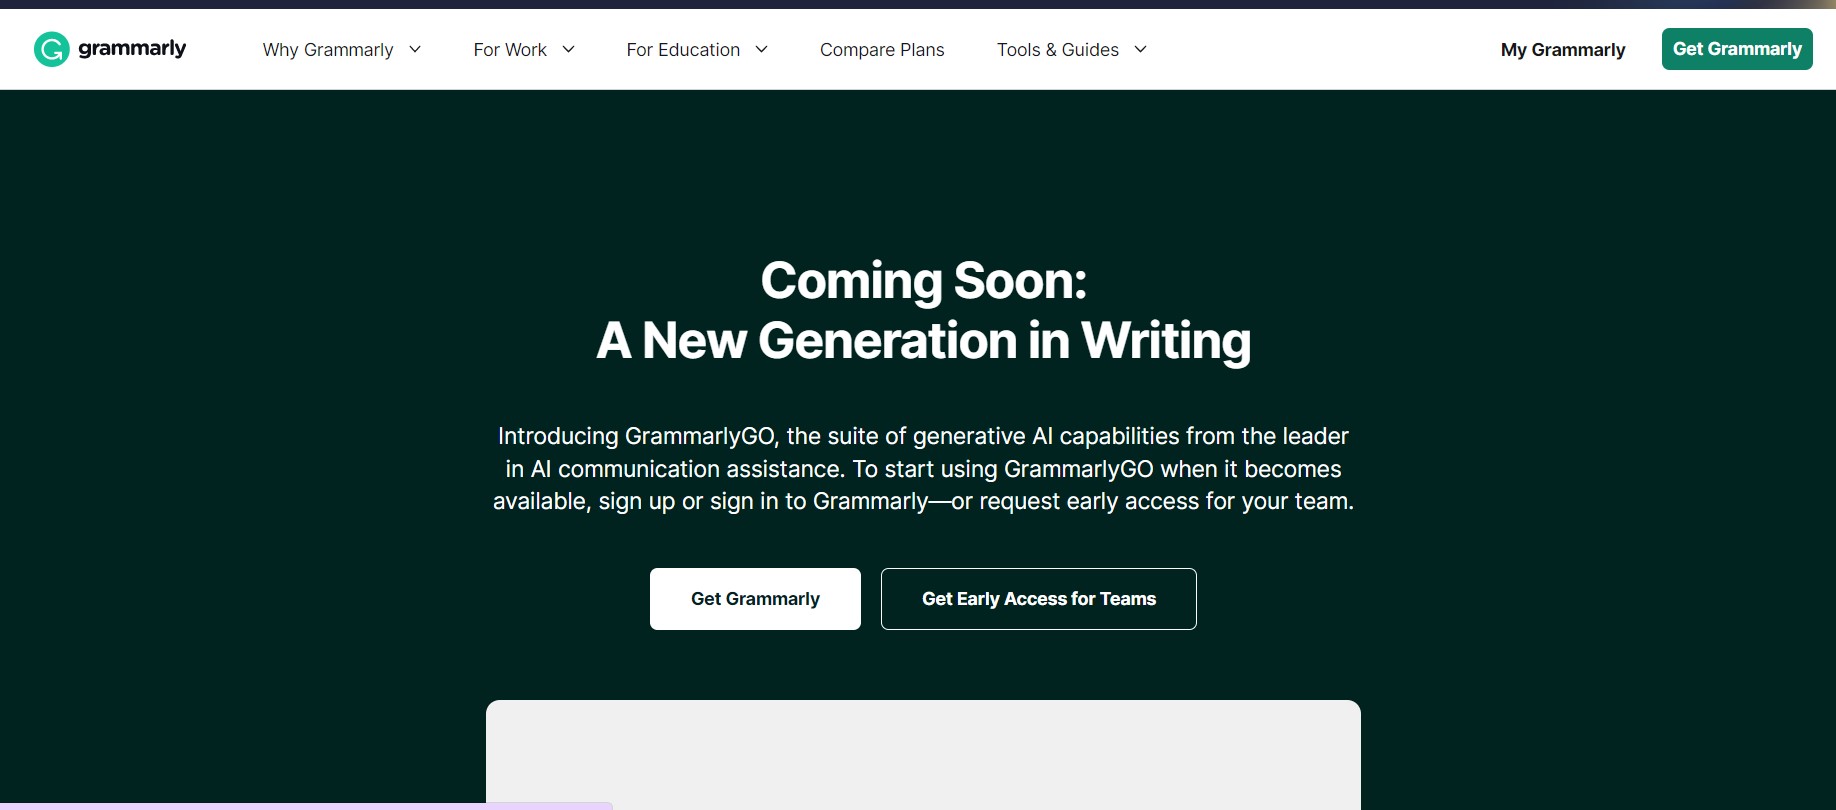 grammarly go reviews